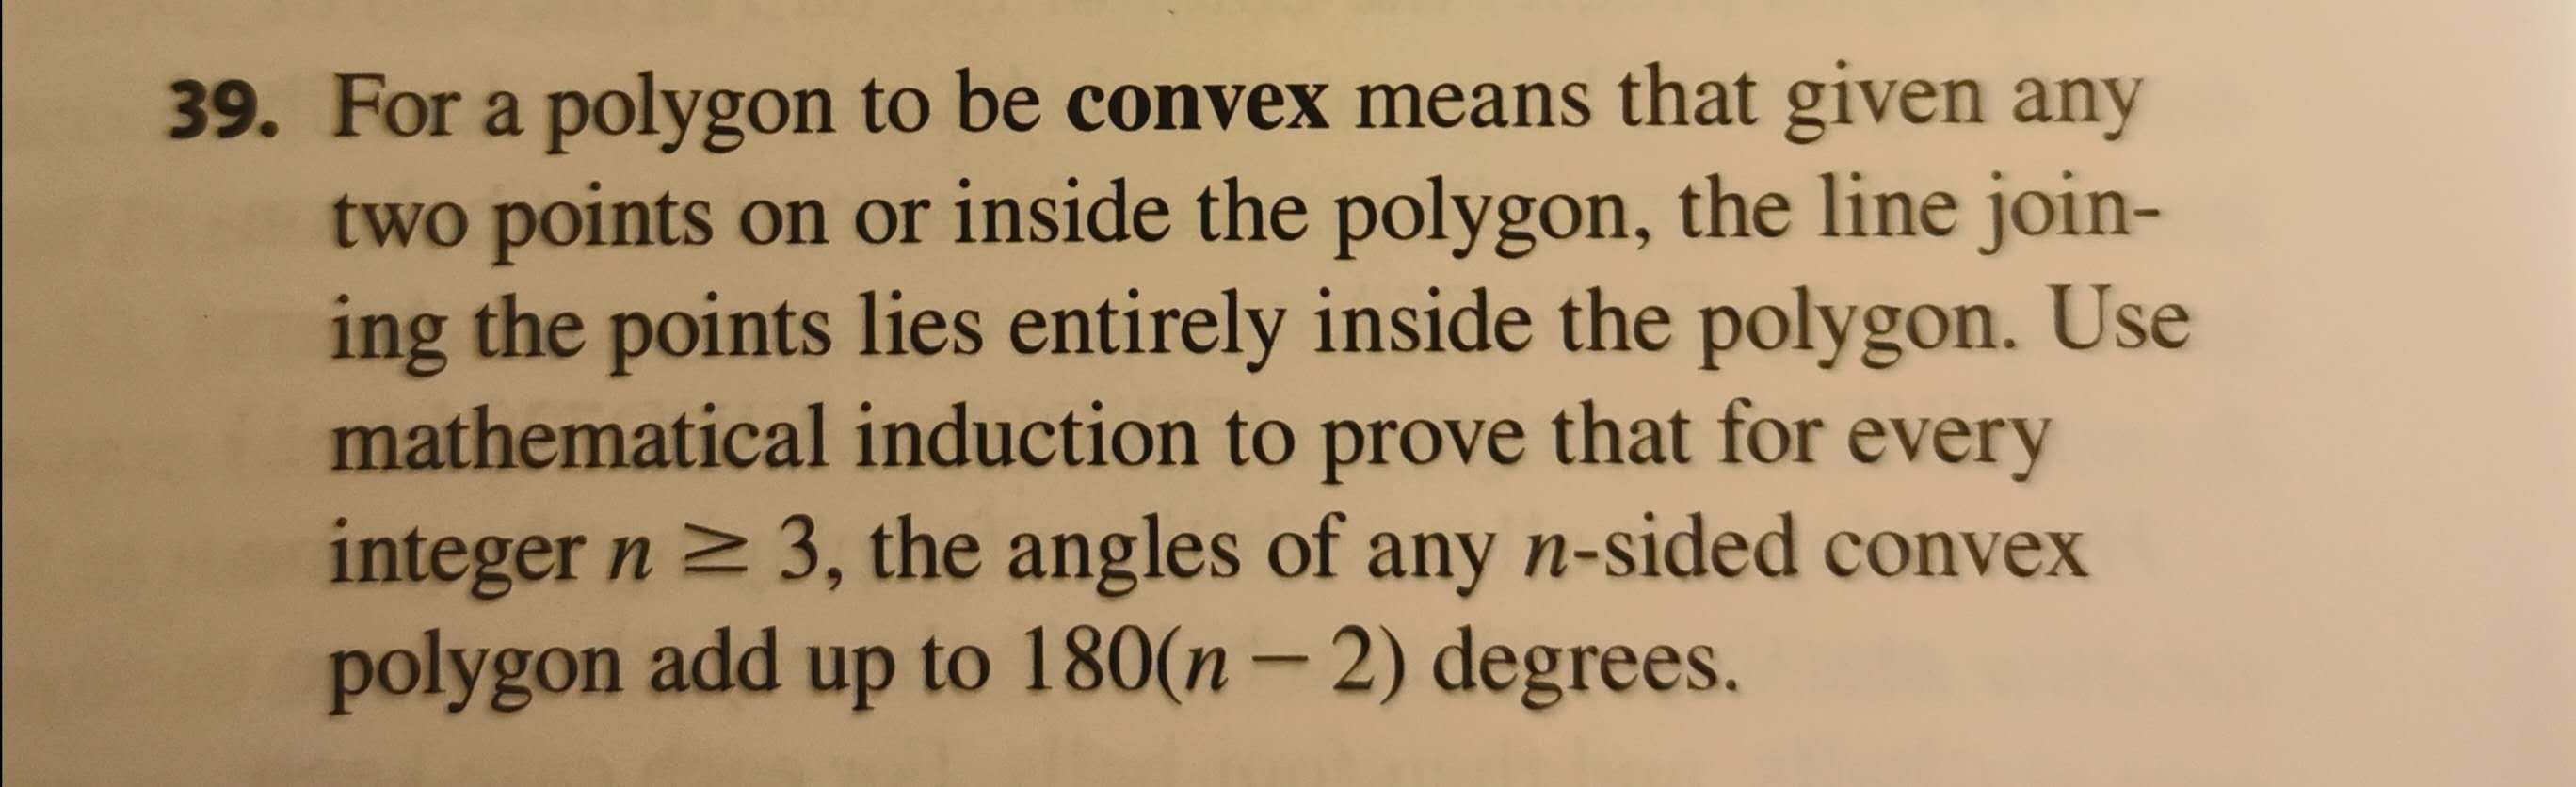 39. For a polygon to be convex means that given any
two points on or inside the polygon, the line join-
ing the points lies entirely inside the polygon. Use
mathematical induction to prove that for every
integer n 2 3, the angles of any n-sided convex
polygon add up to 180(n– 2) degrees.
